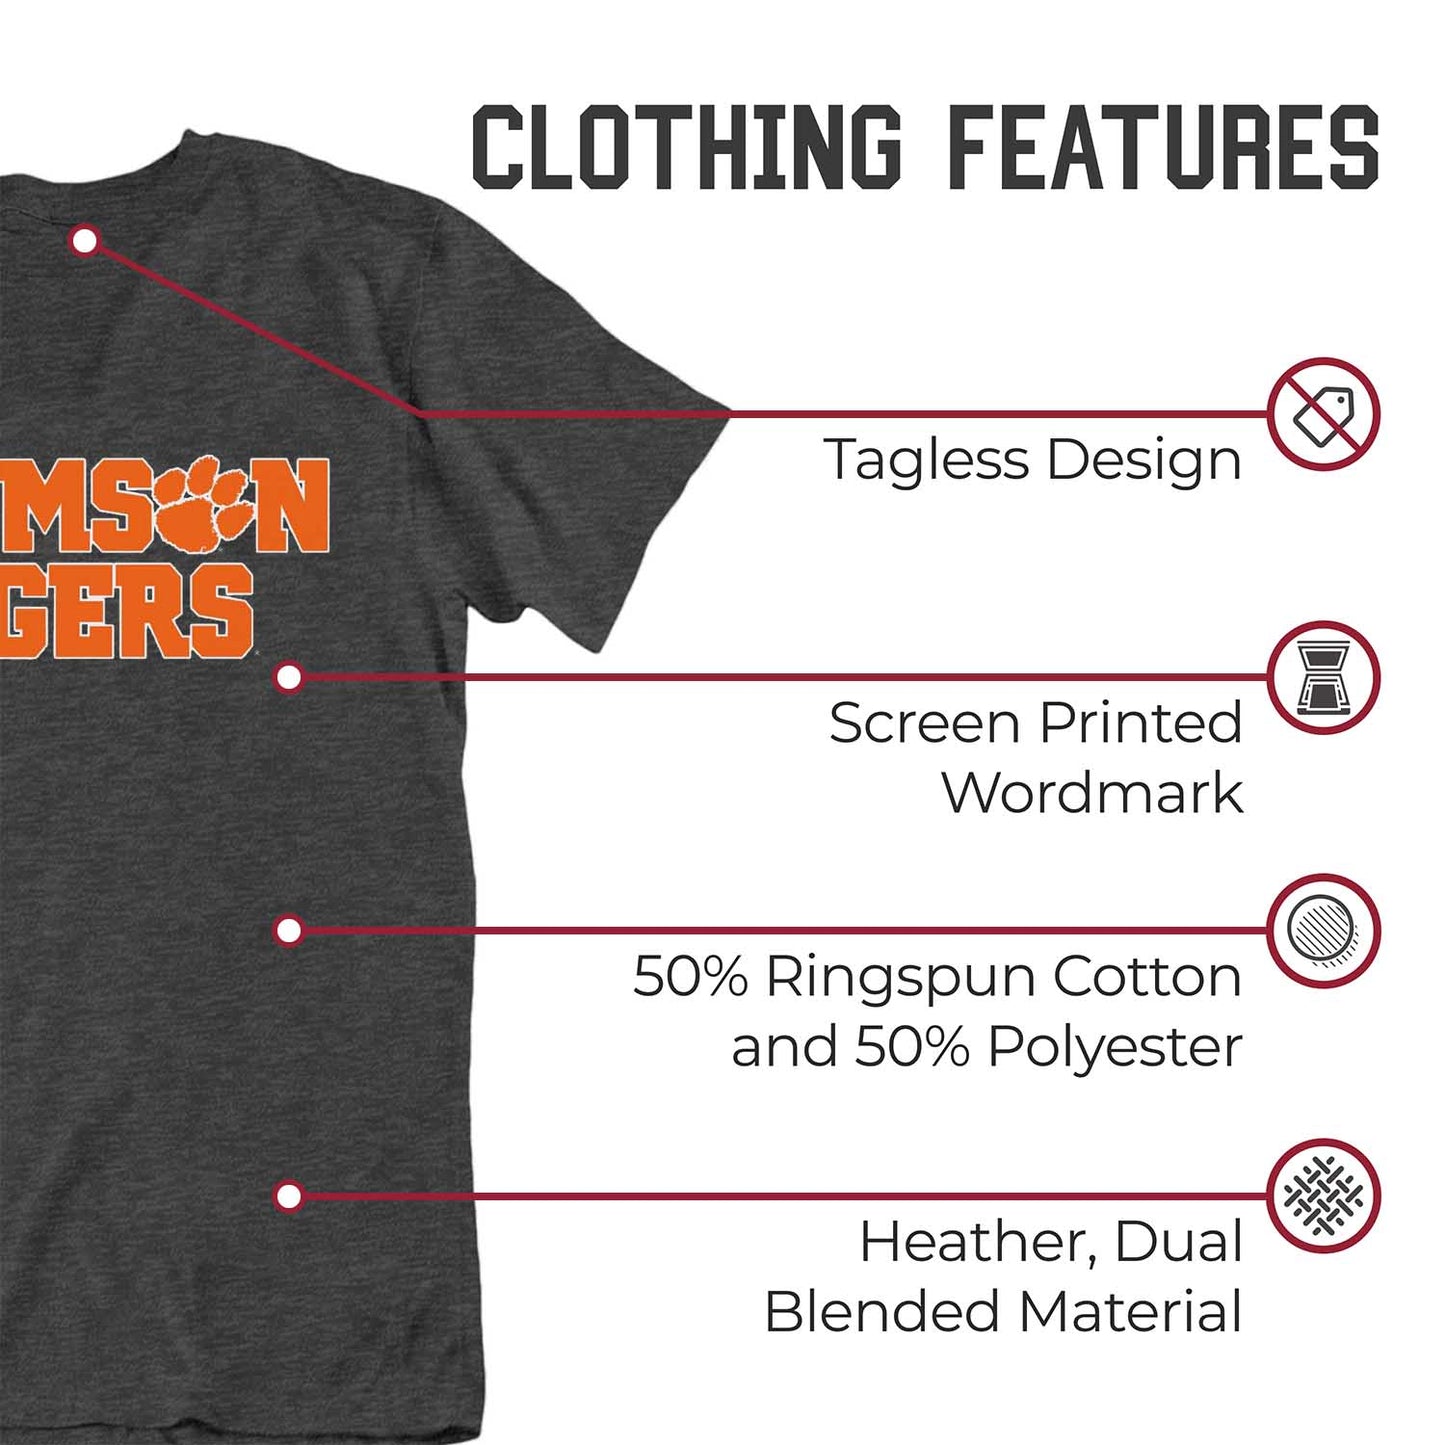 Clemson Tigers Campus Colors NCAA Adult Cotton Blend Charcoal Tagless T-Shirt - Charcoal